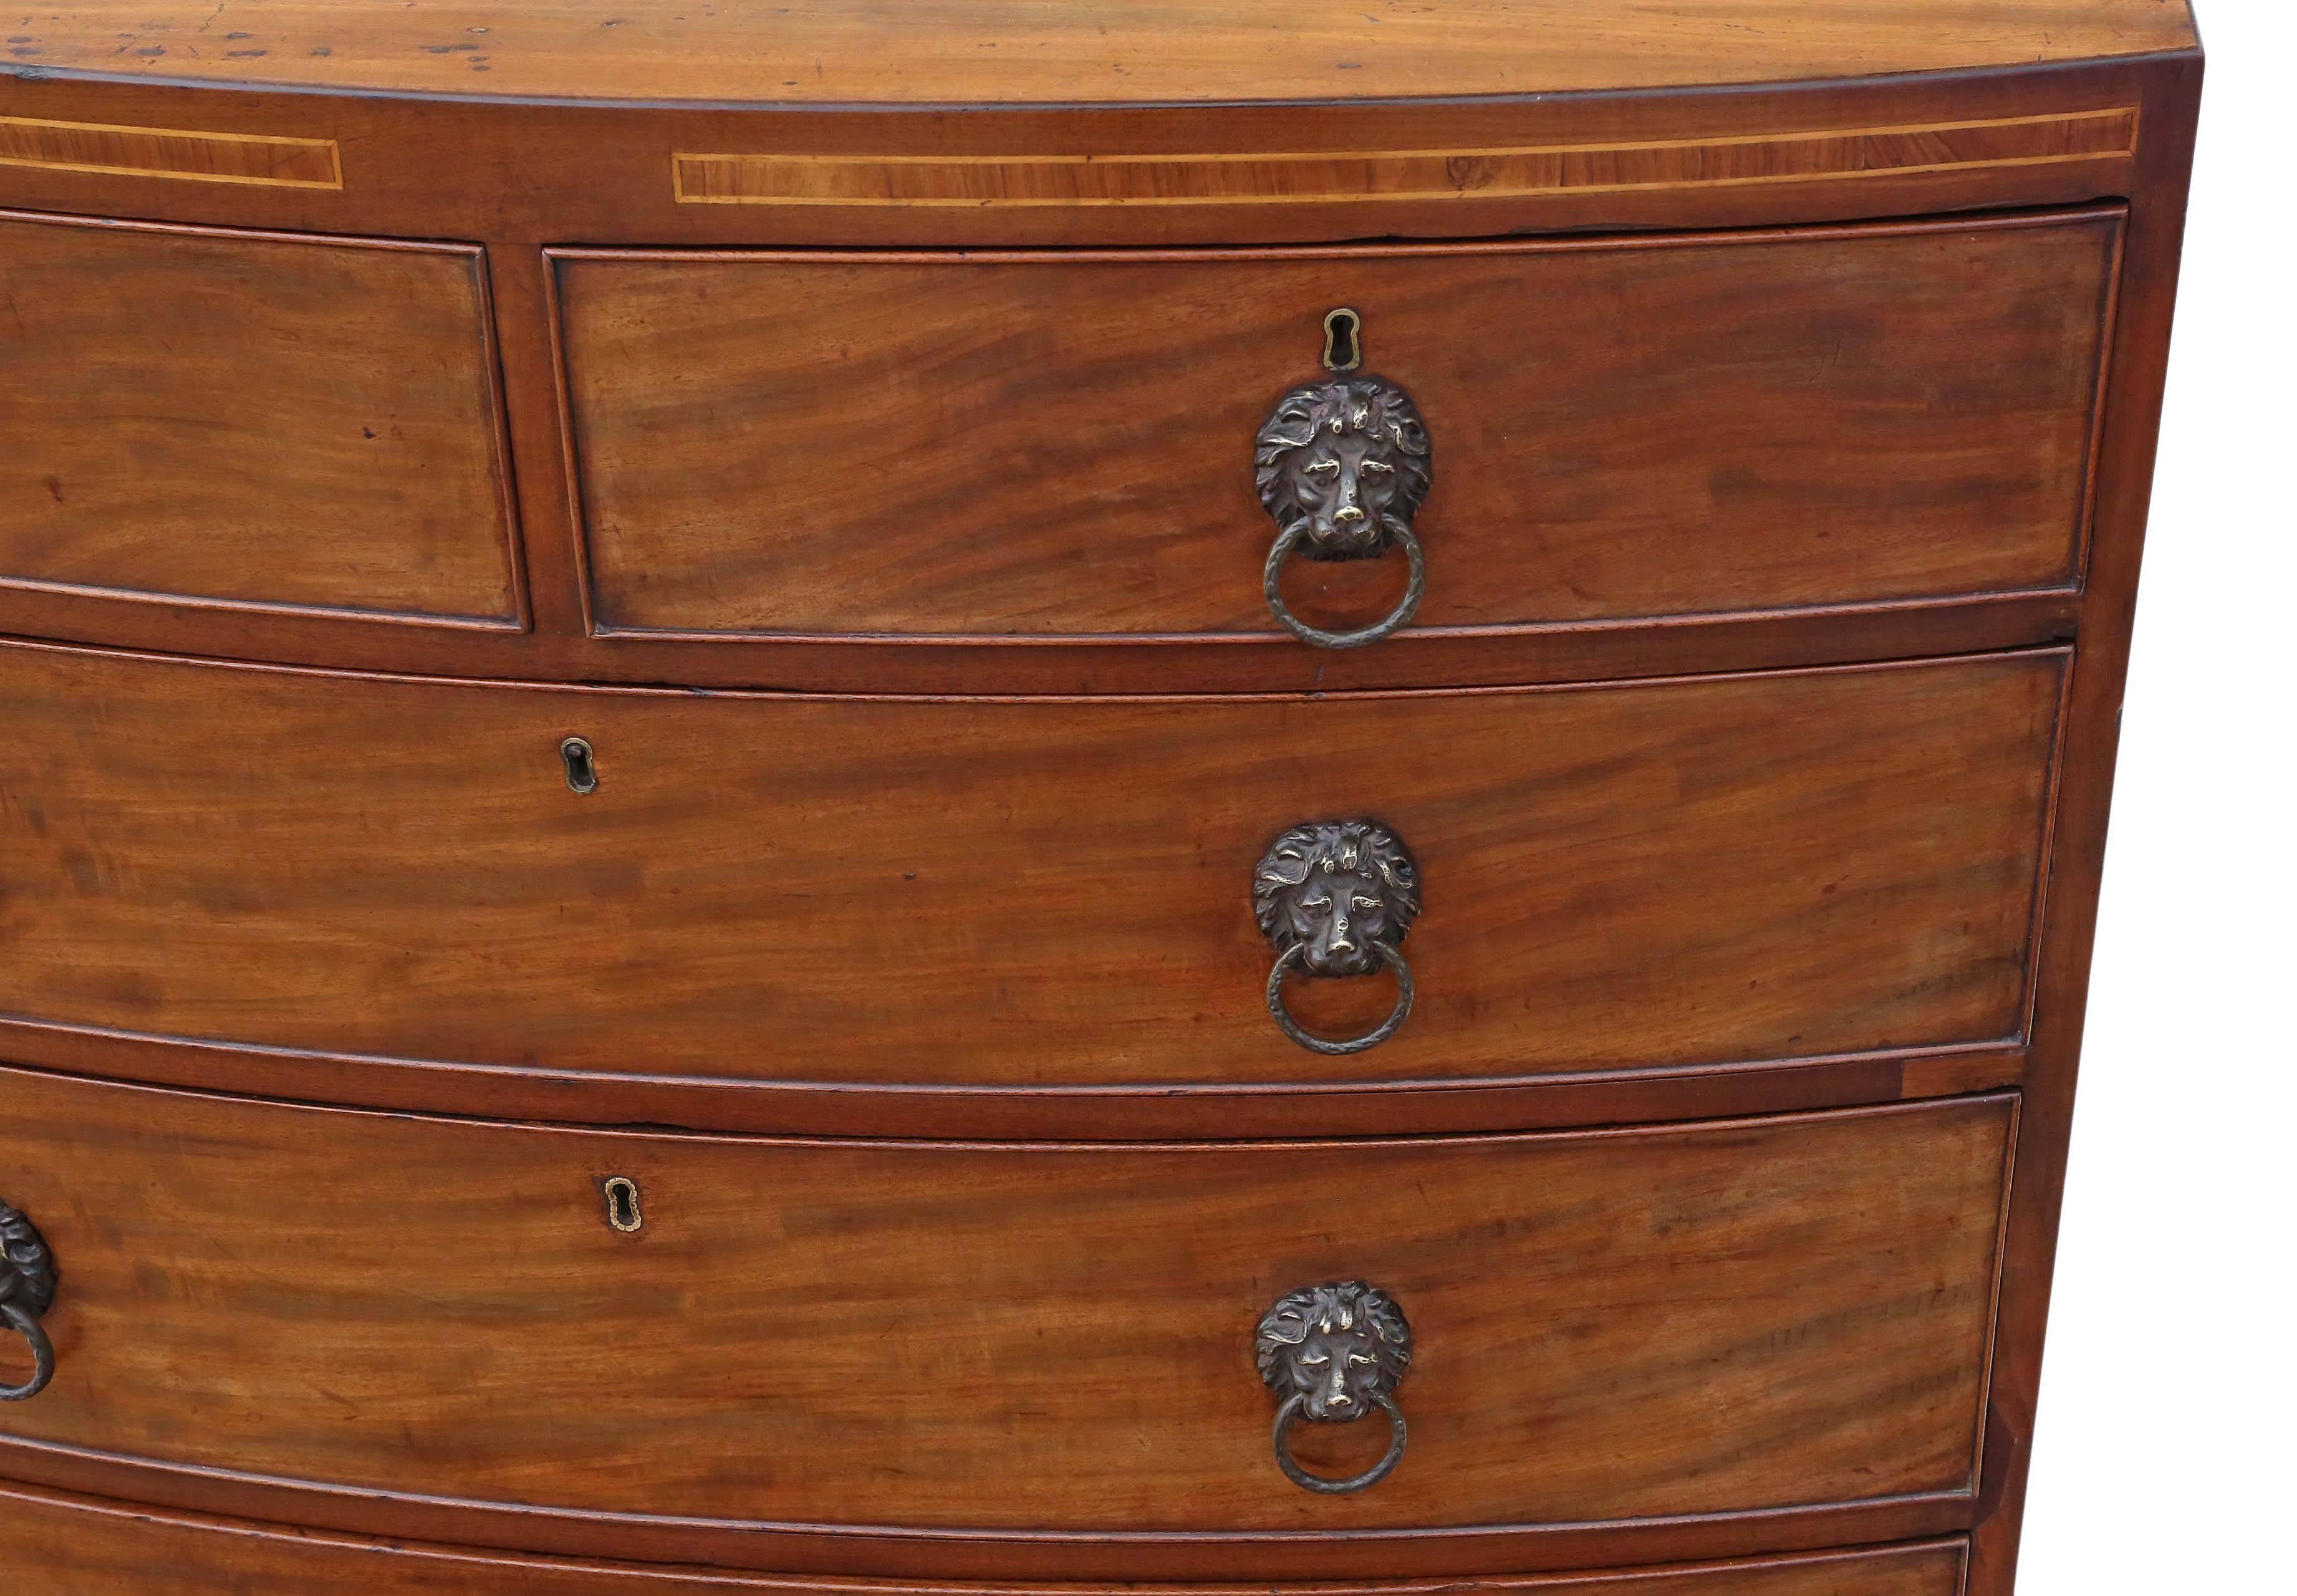 British Antique Quality Regency Bow Front Flame Mahogany Chest of Drawers, circa 1820